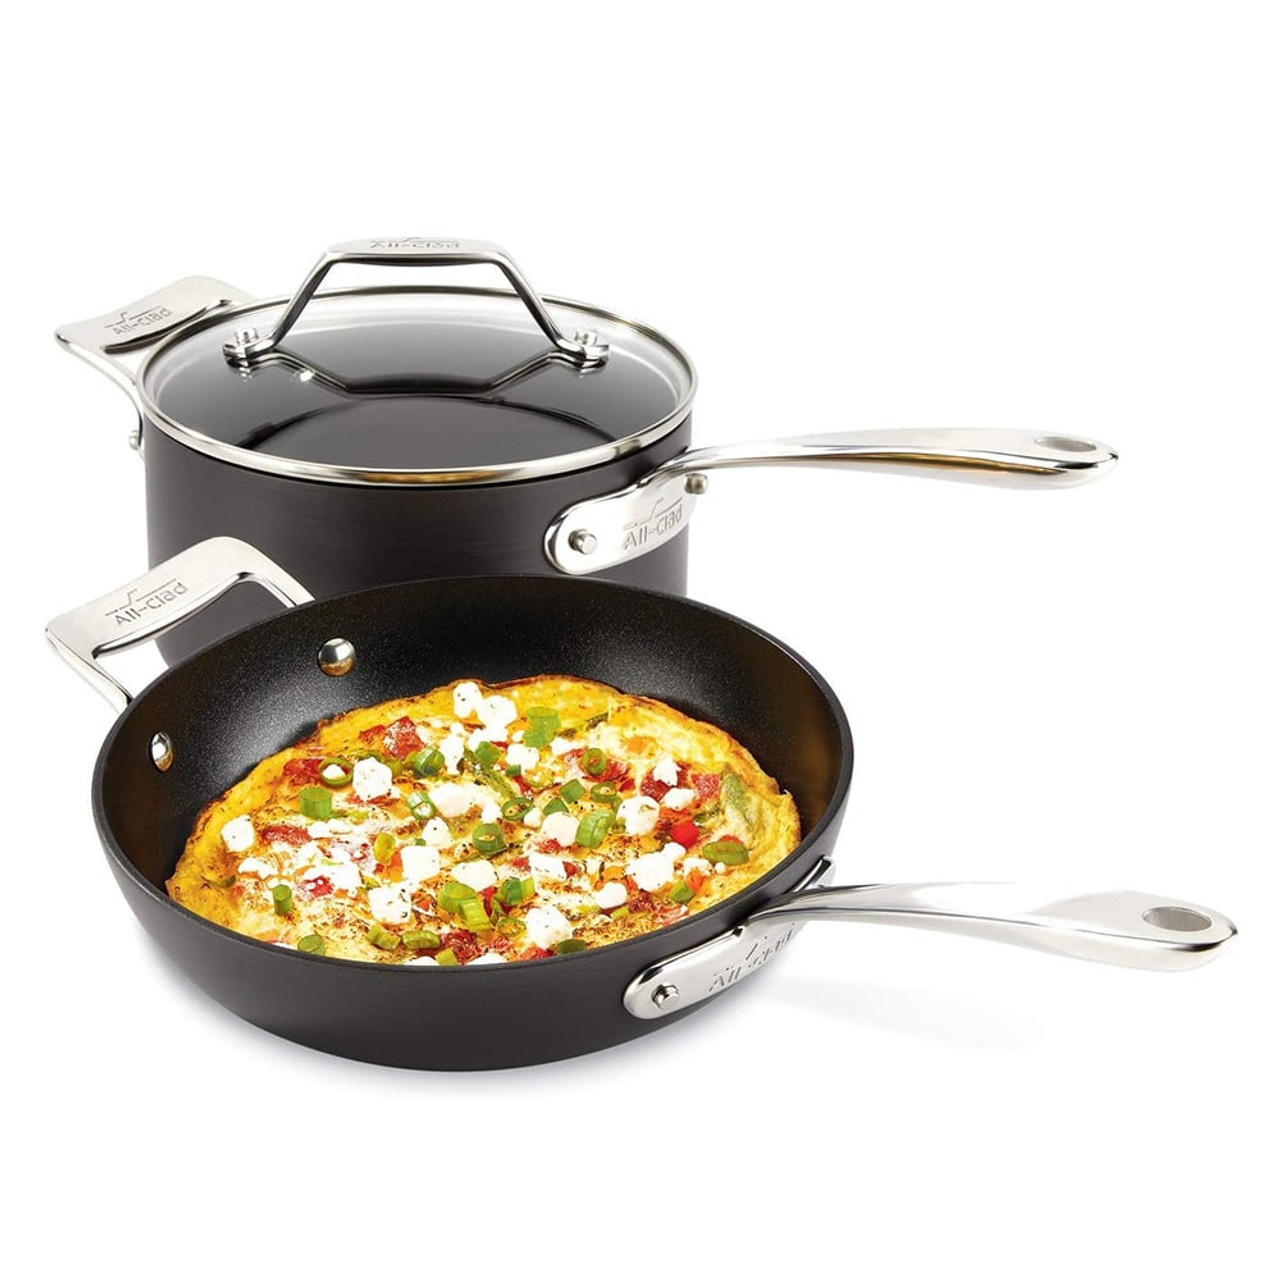 https://cdn11.bigcommerce.com/s-hccytny0od/images/stencil/1280x1280/products/3570/12747/all-clad-essentials-nonstick-small-fry-pan-sauce-pan-set-1__43900.1601383468.jpg?c=2?imbypass=on